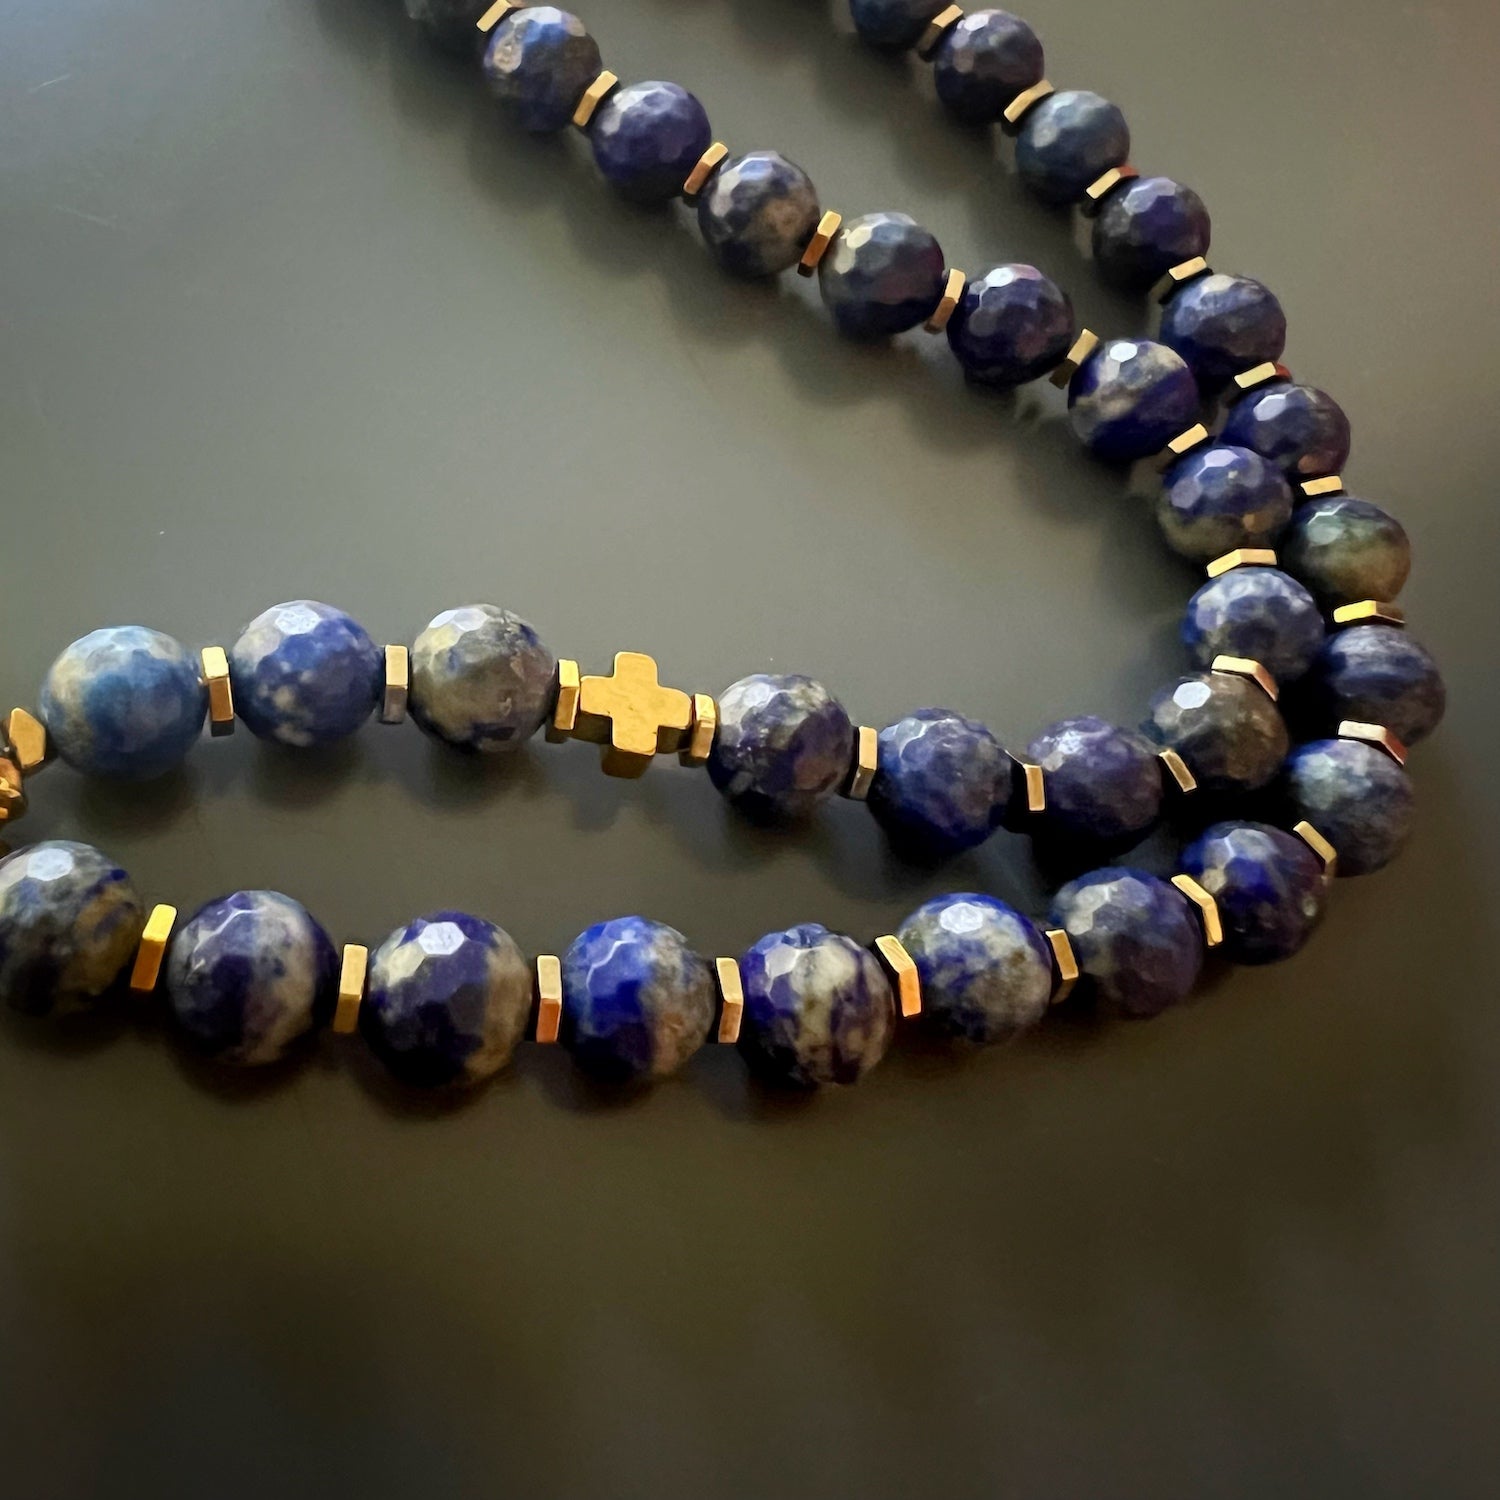 Indulge in the uniqueness of the Medusa Lapis Lazuli Necklace, showcasing lapis lazuli stone beads and intricate sterling silver detailing.